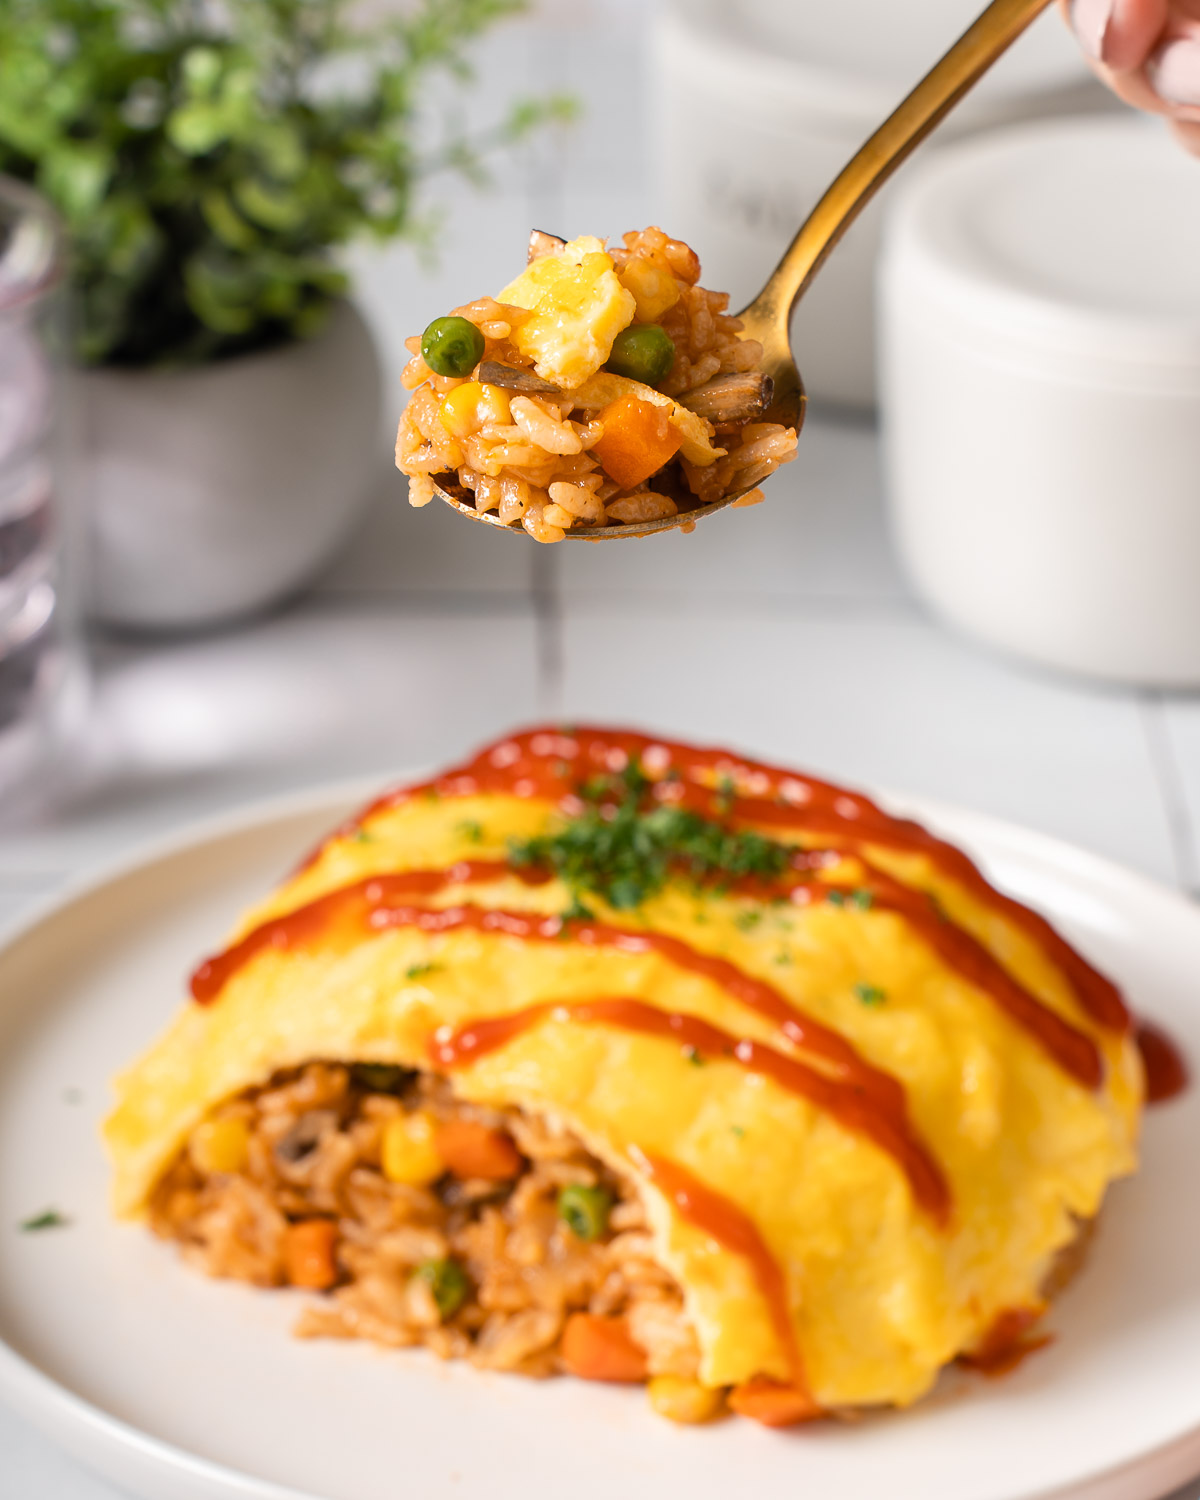 Someone lifting up a spoonful of fried rice from a plate of omurice.